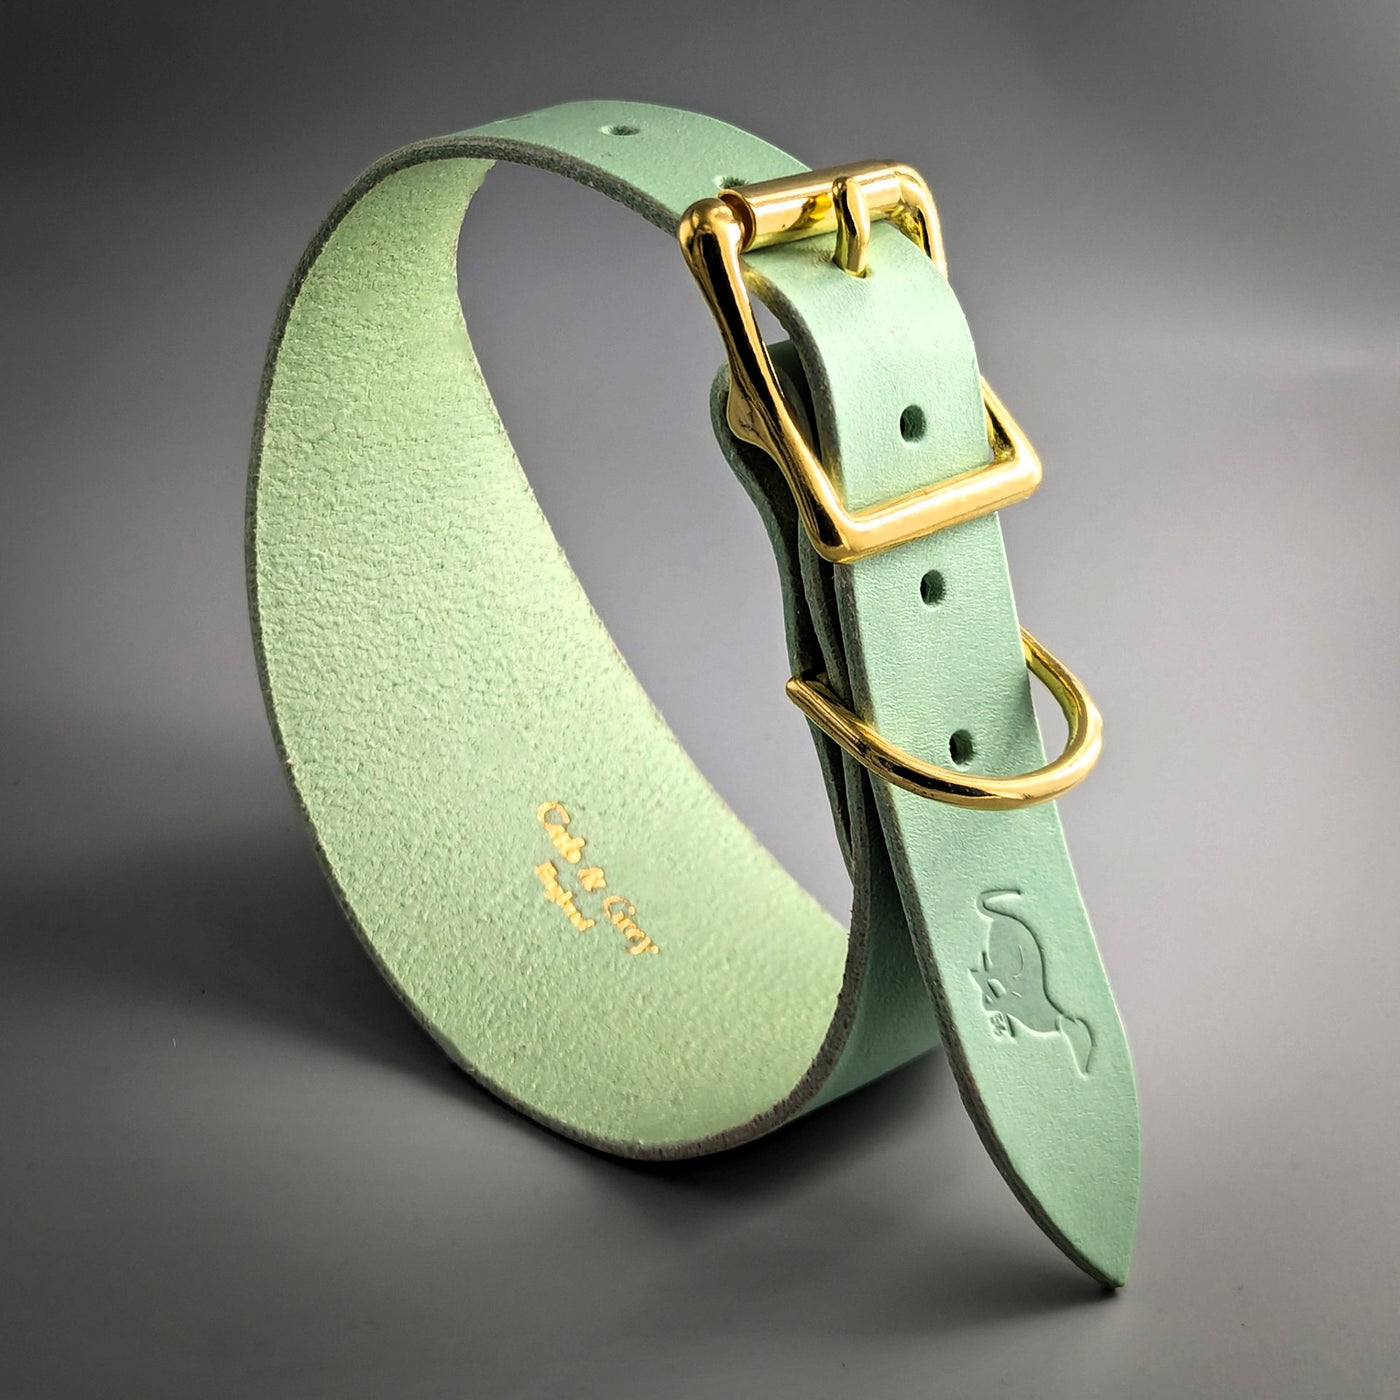 Moriarty Leather Hound Collar in Pistachio